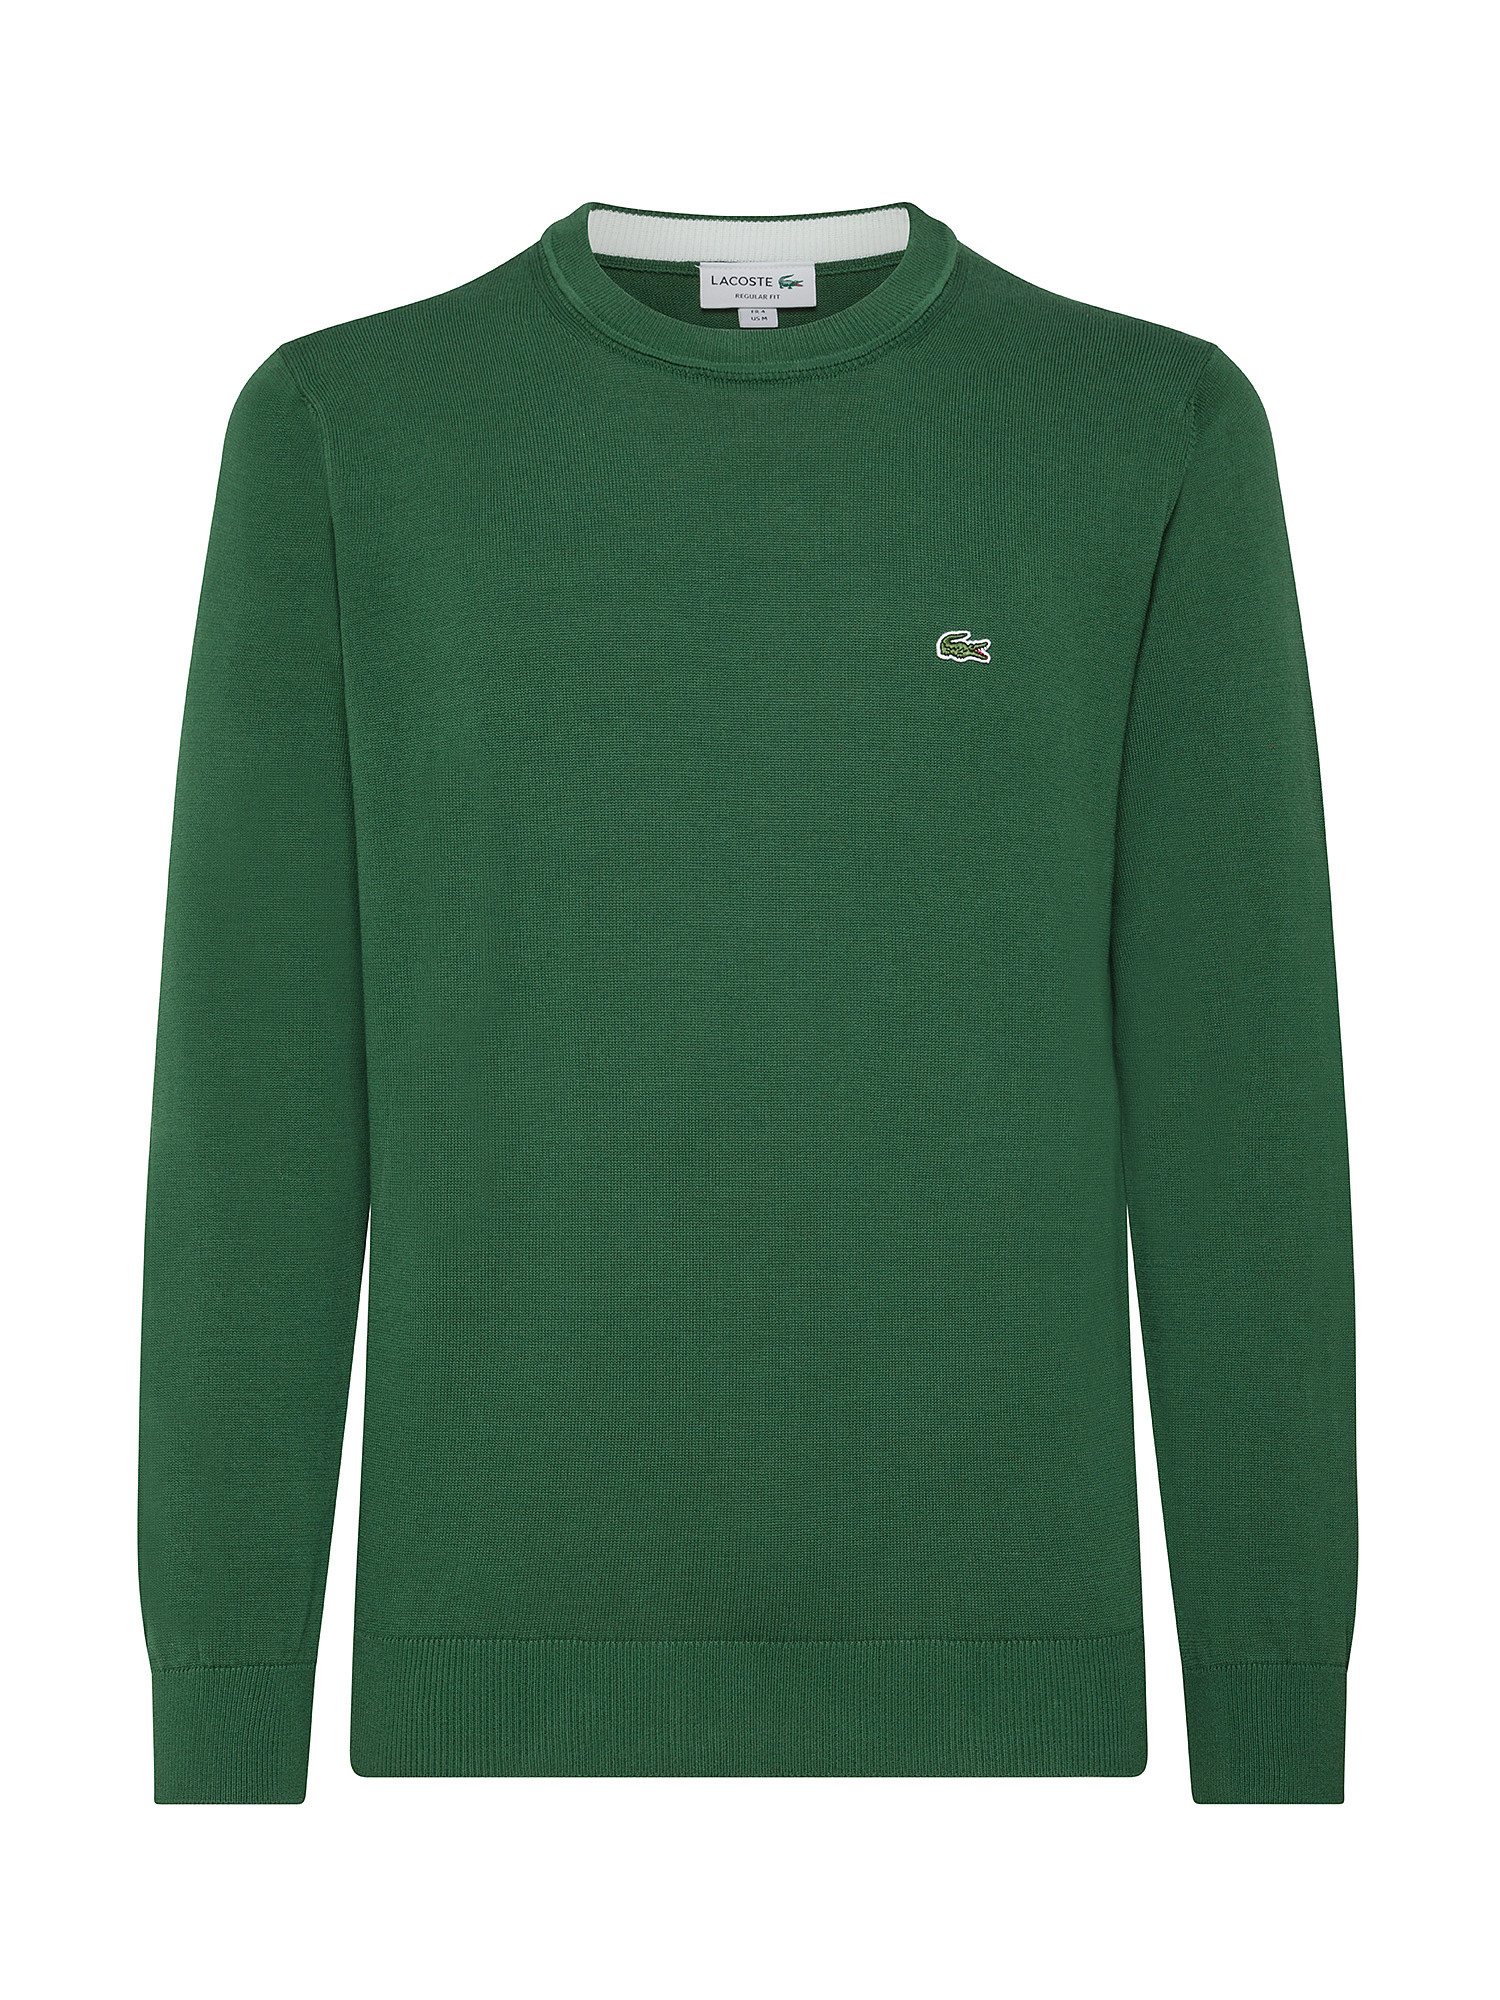 Lacoste - Cotton crewneck sweater, Green, large image number 0